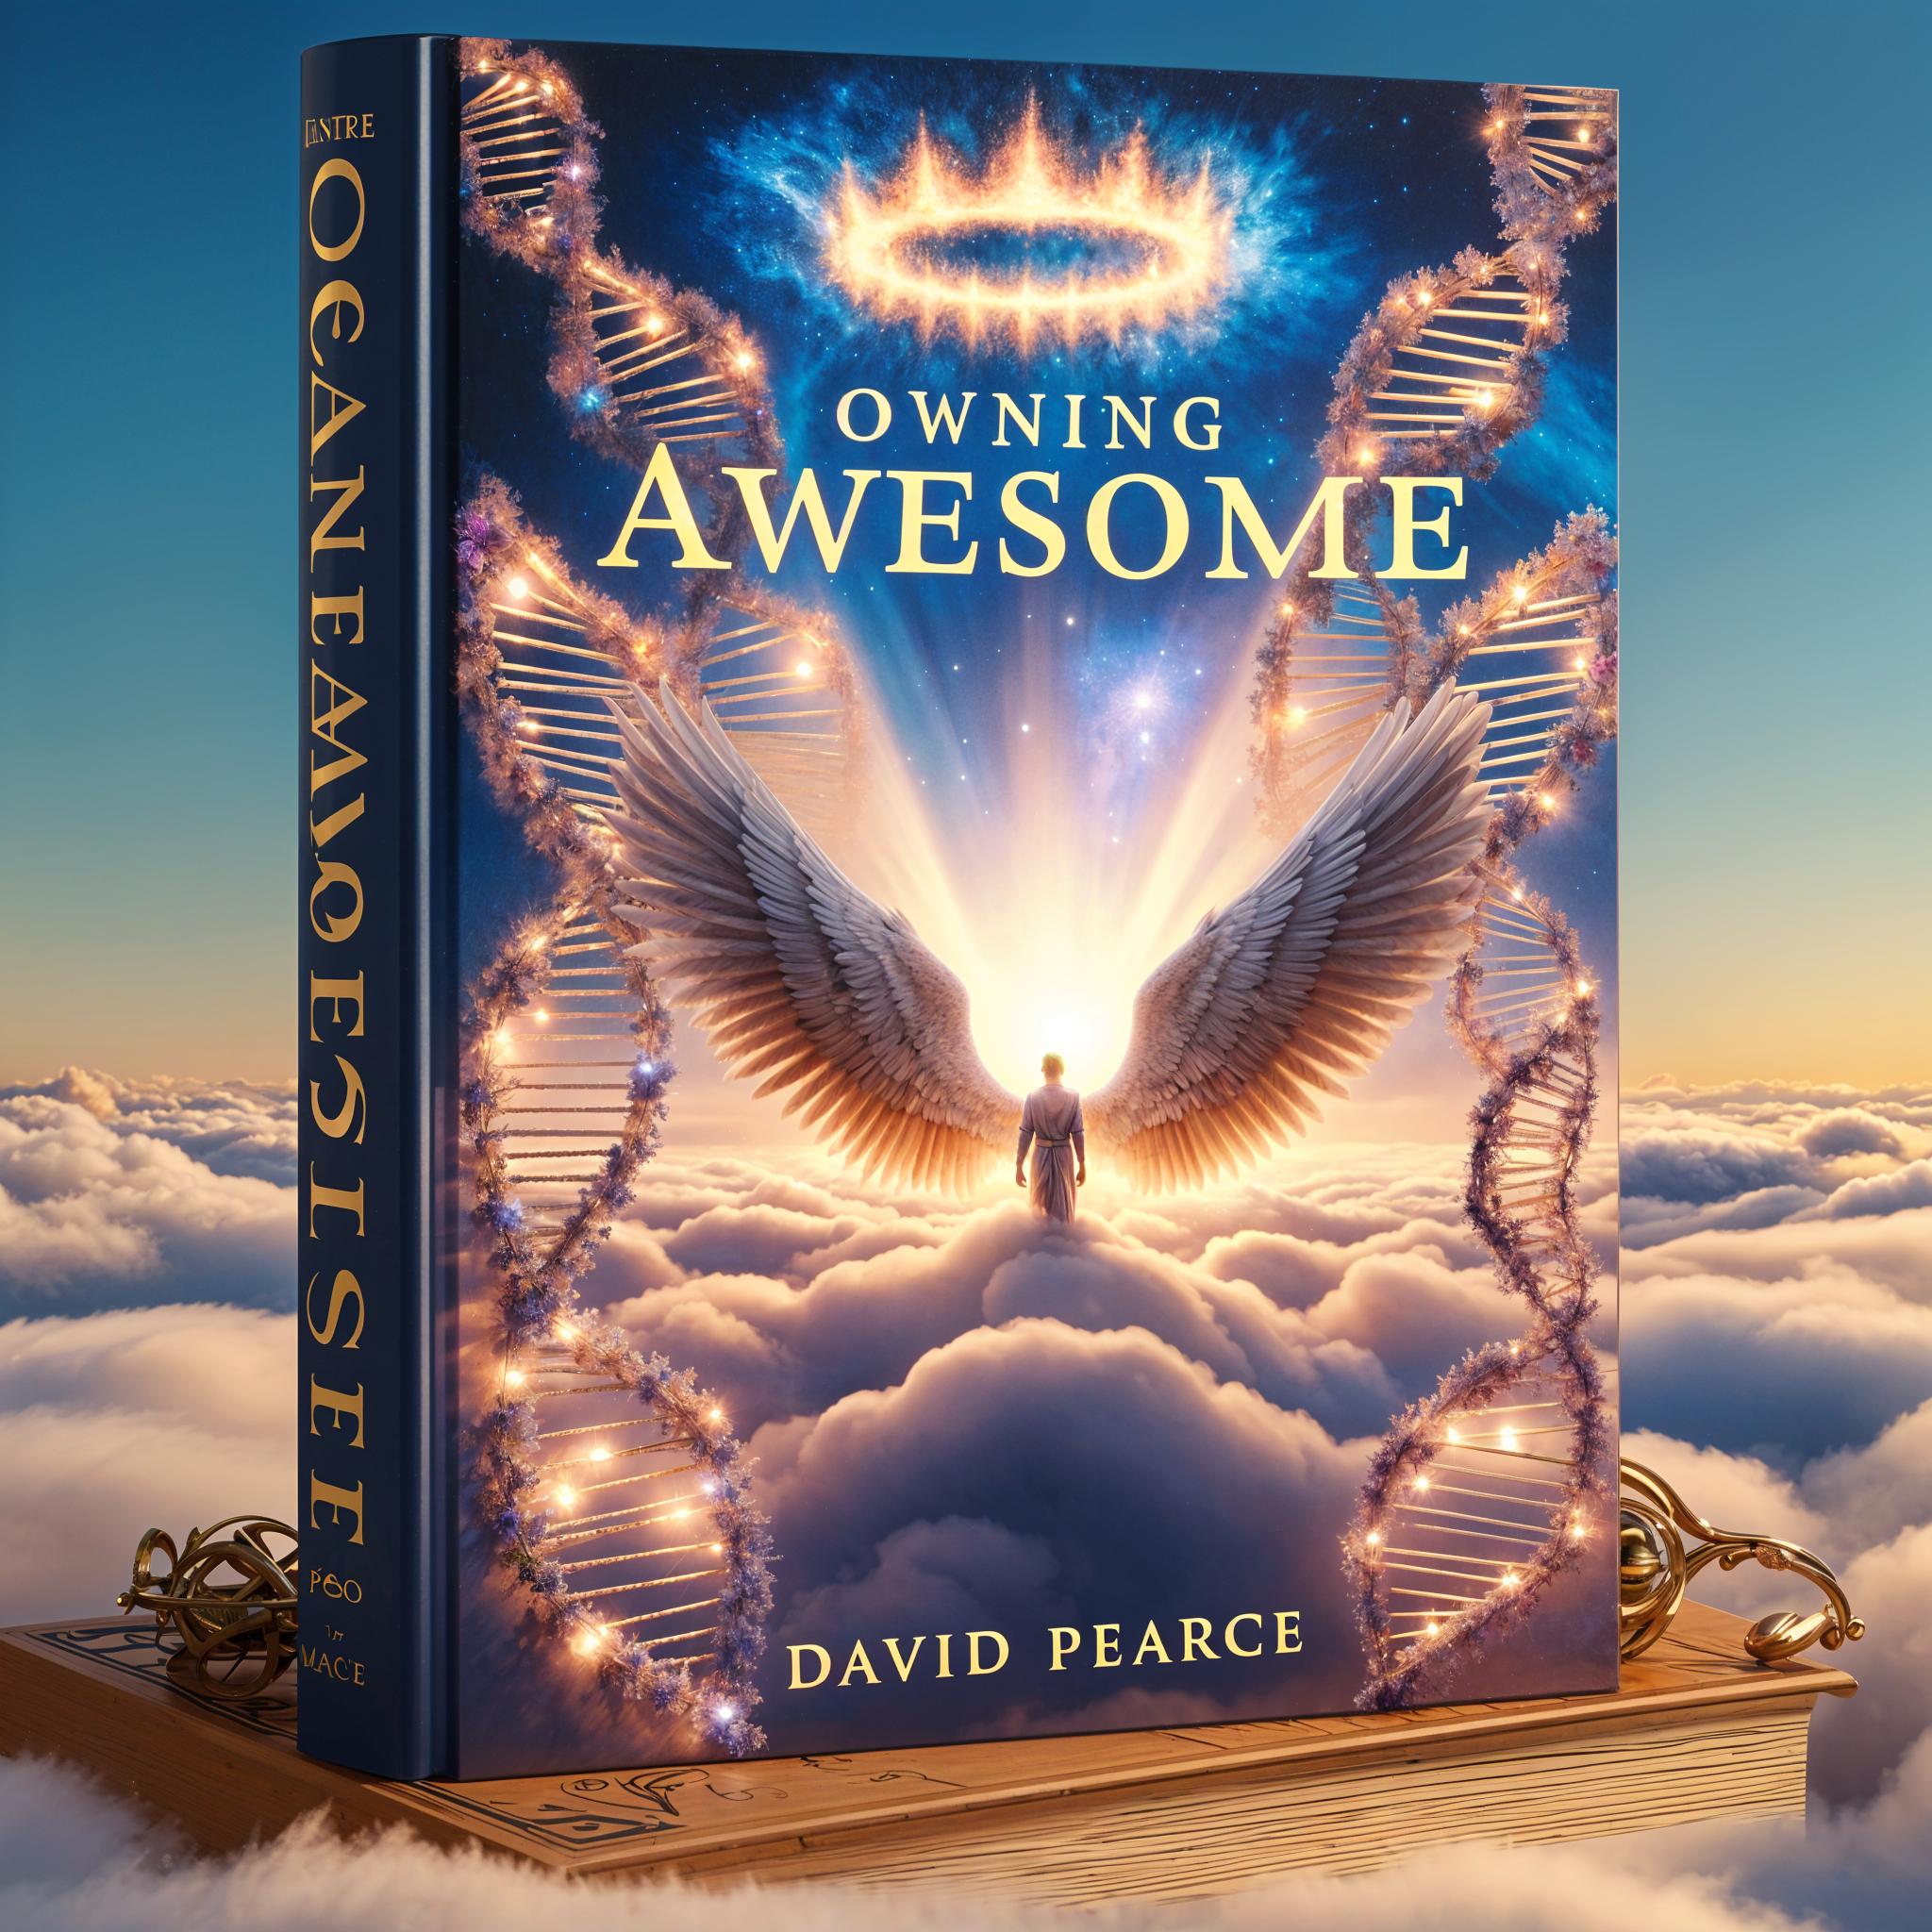 Owning Awesome by David Pearce